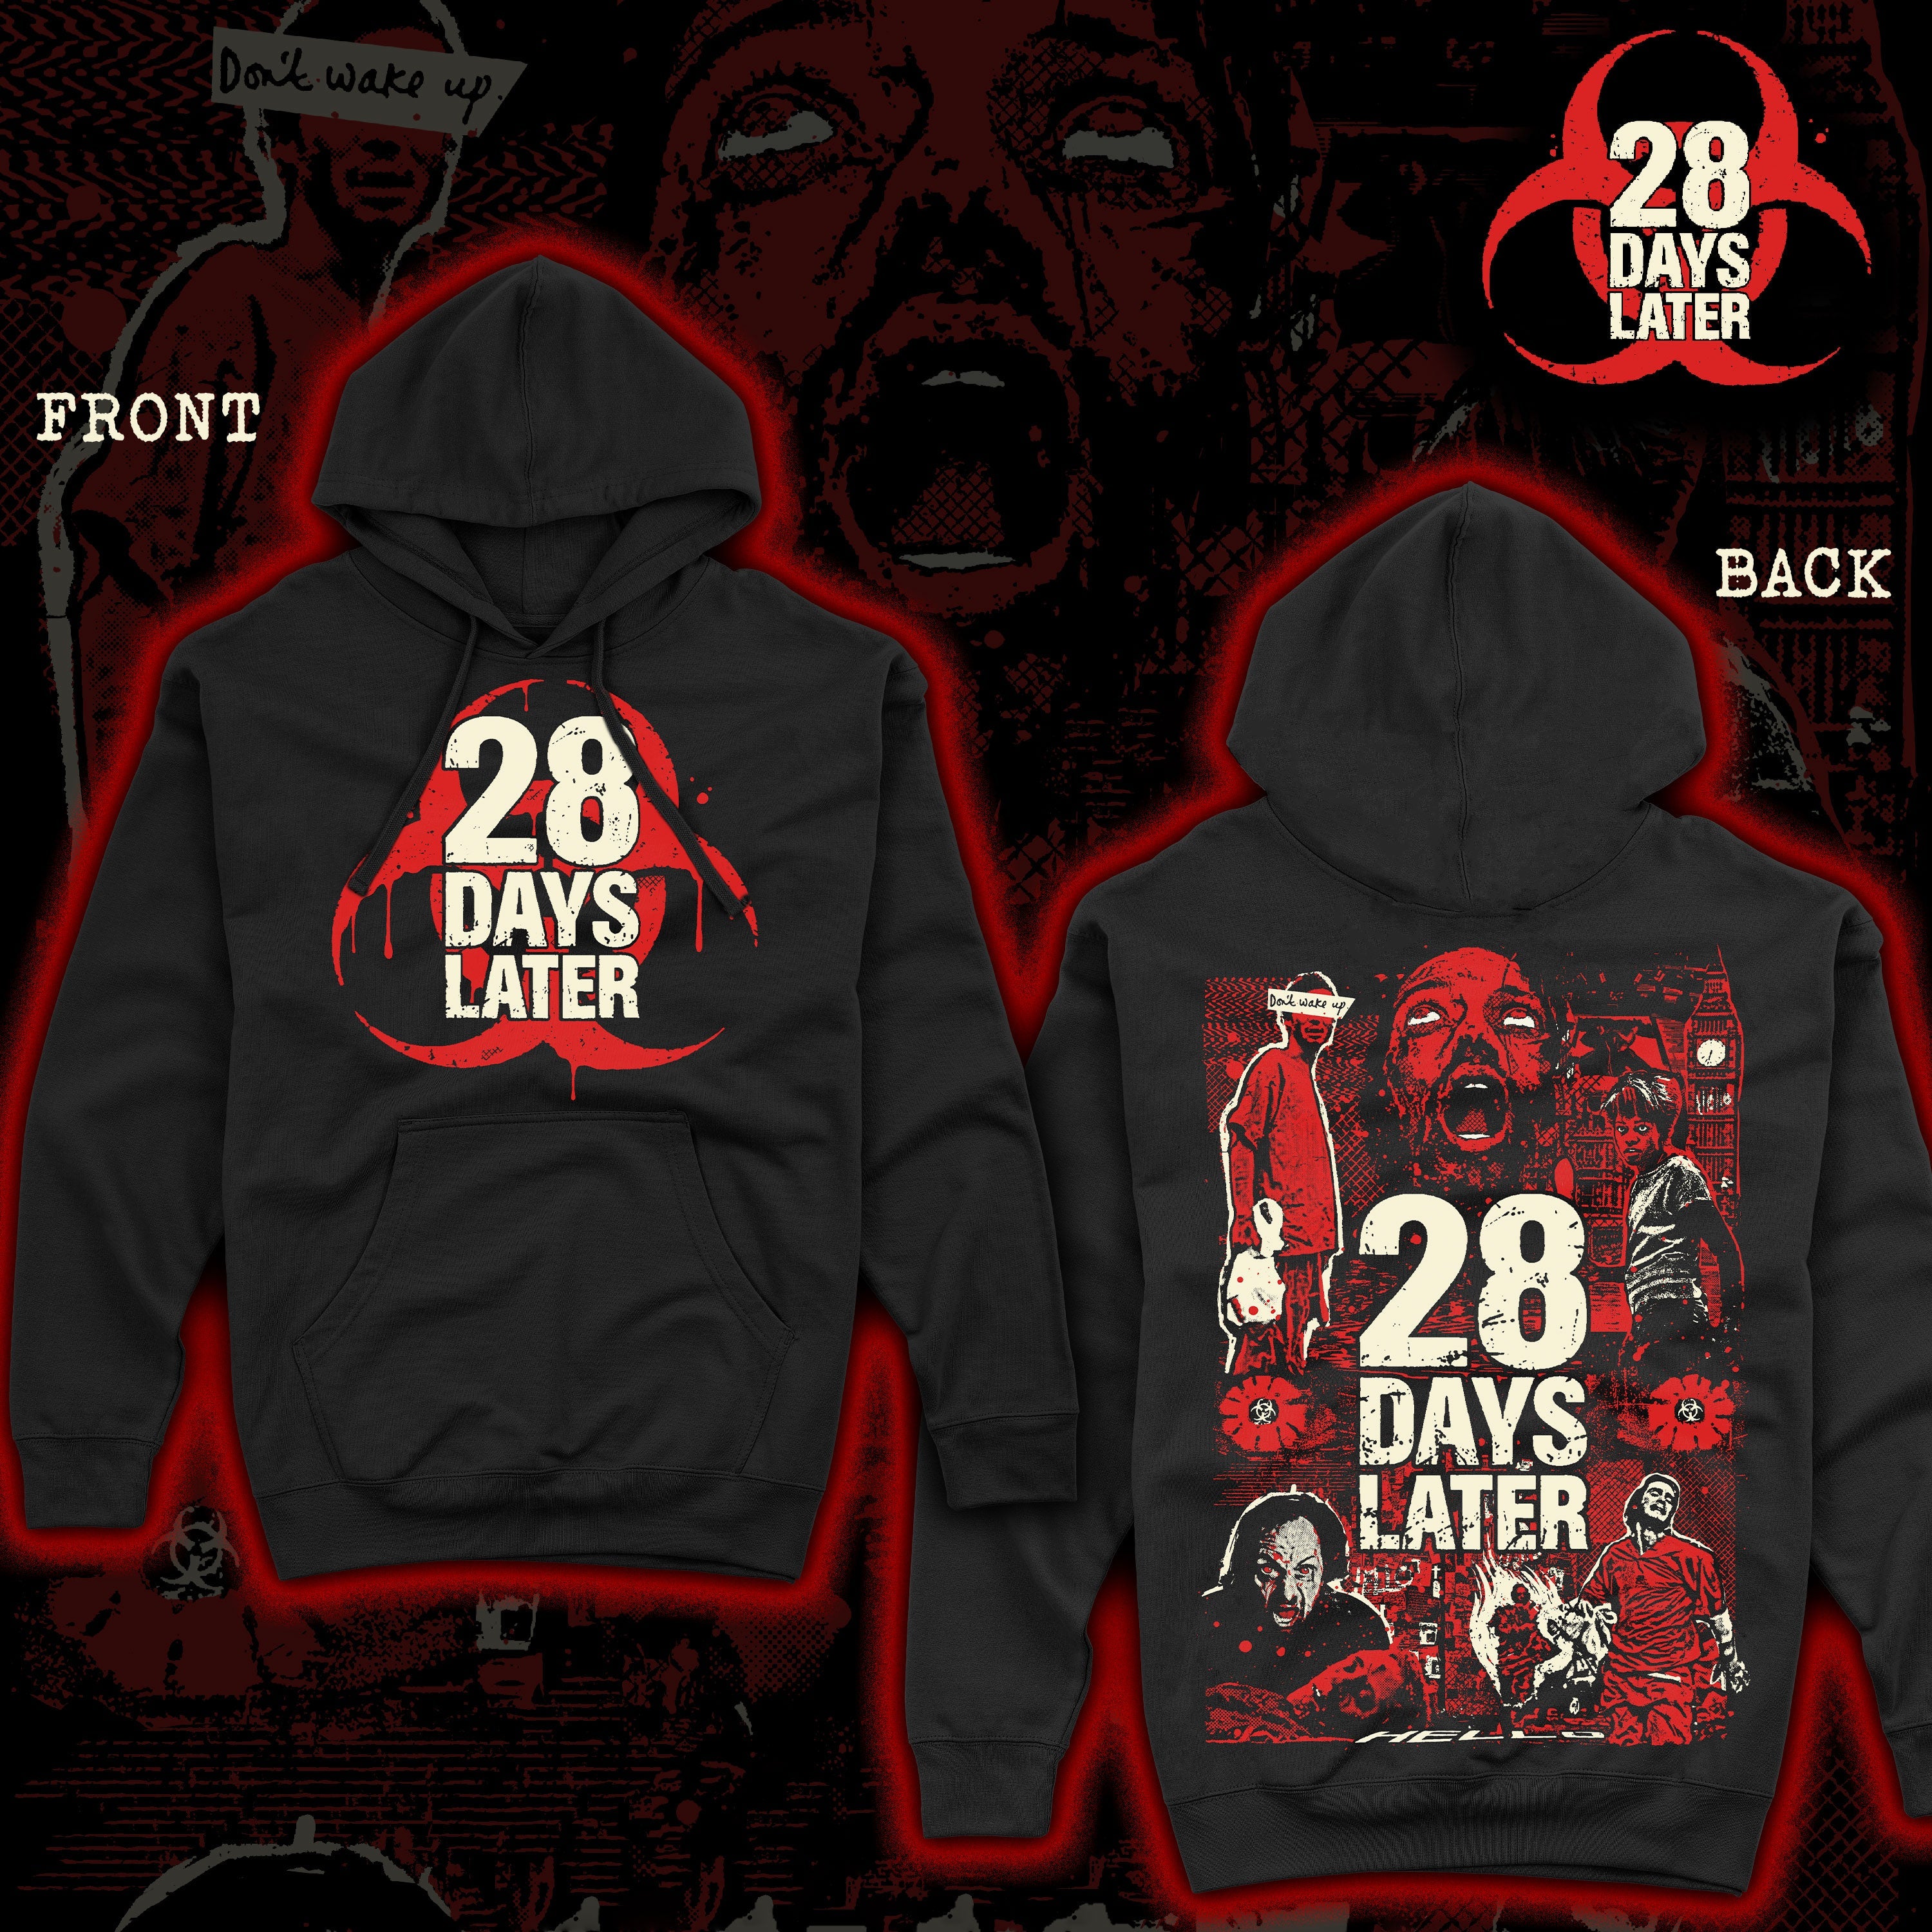 MISPRINT: 28 Days Later "The End is Nigh" Pullover hoodie